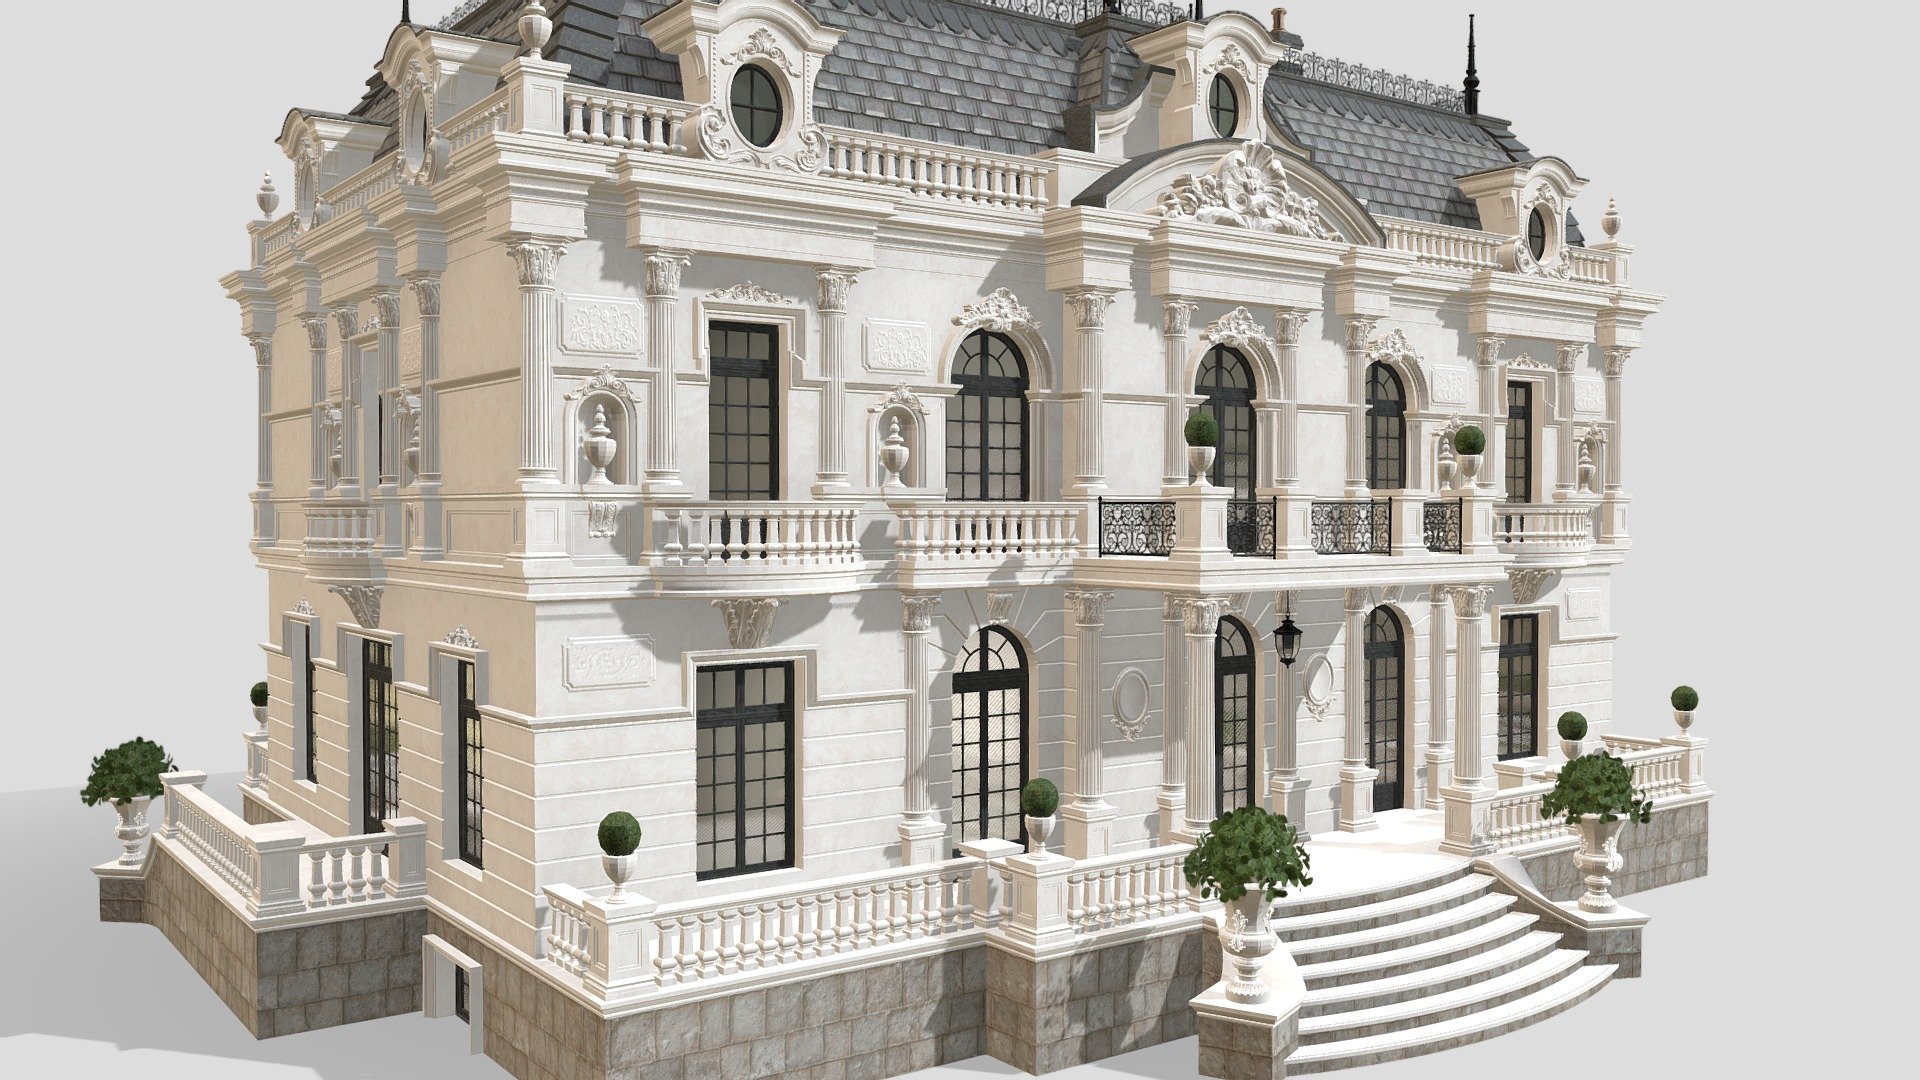 Inspiration obtained from ТопДом, a Russian construction and architectural bureau 3d model